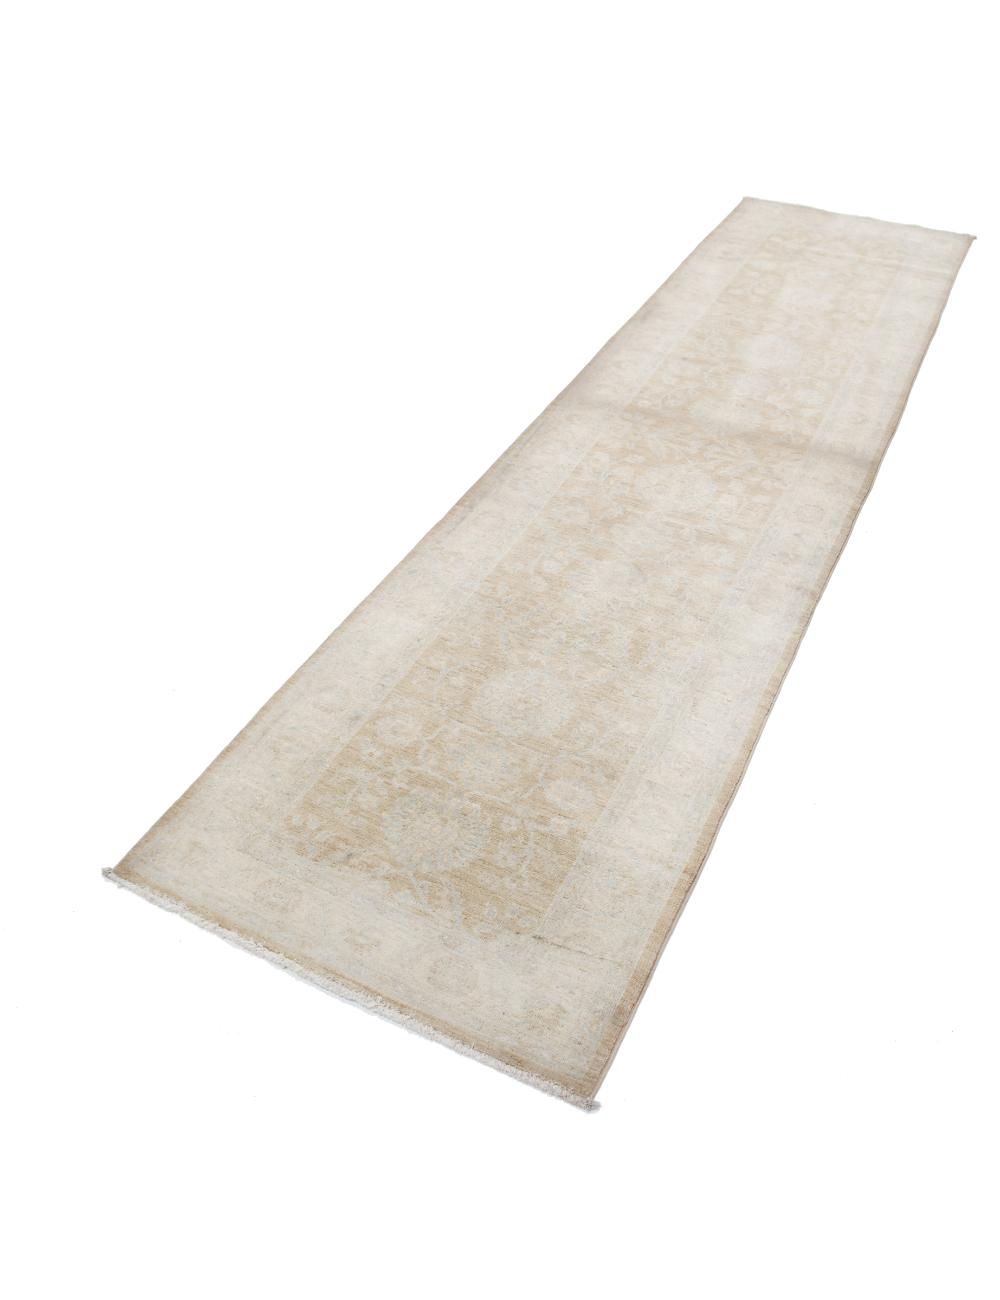 Serenity 2' 7" X 10' 1" Hand-Knotted Wool Rug 2' 7" X 10' 1" (79 X 307) / Taupe / Ivory